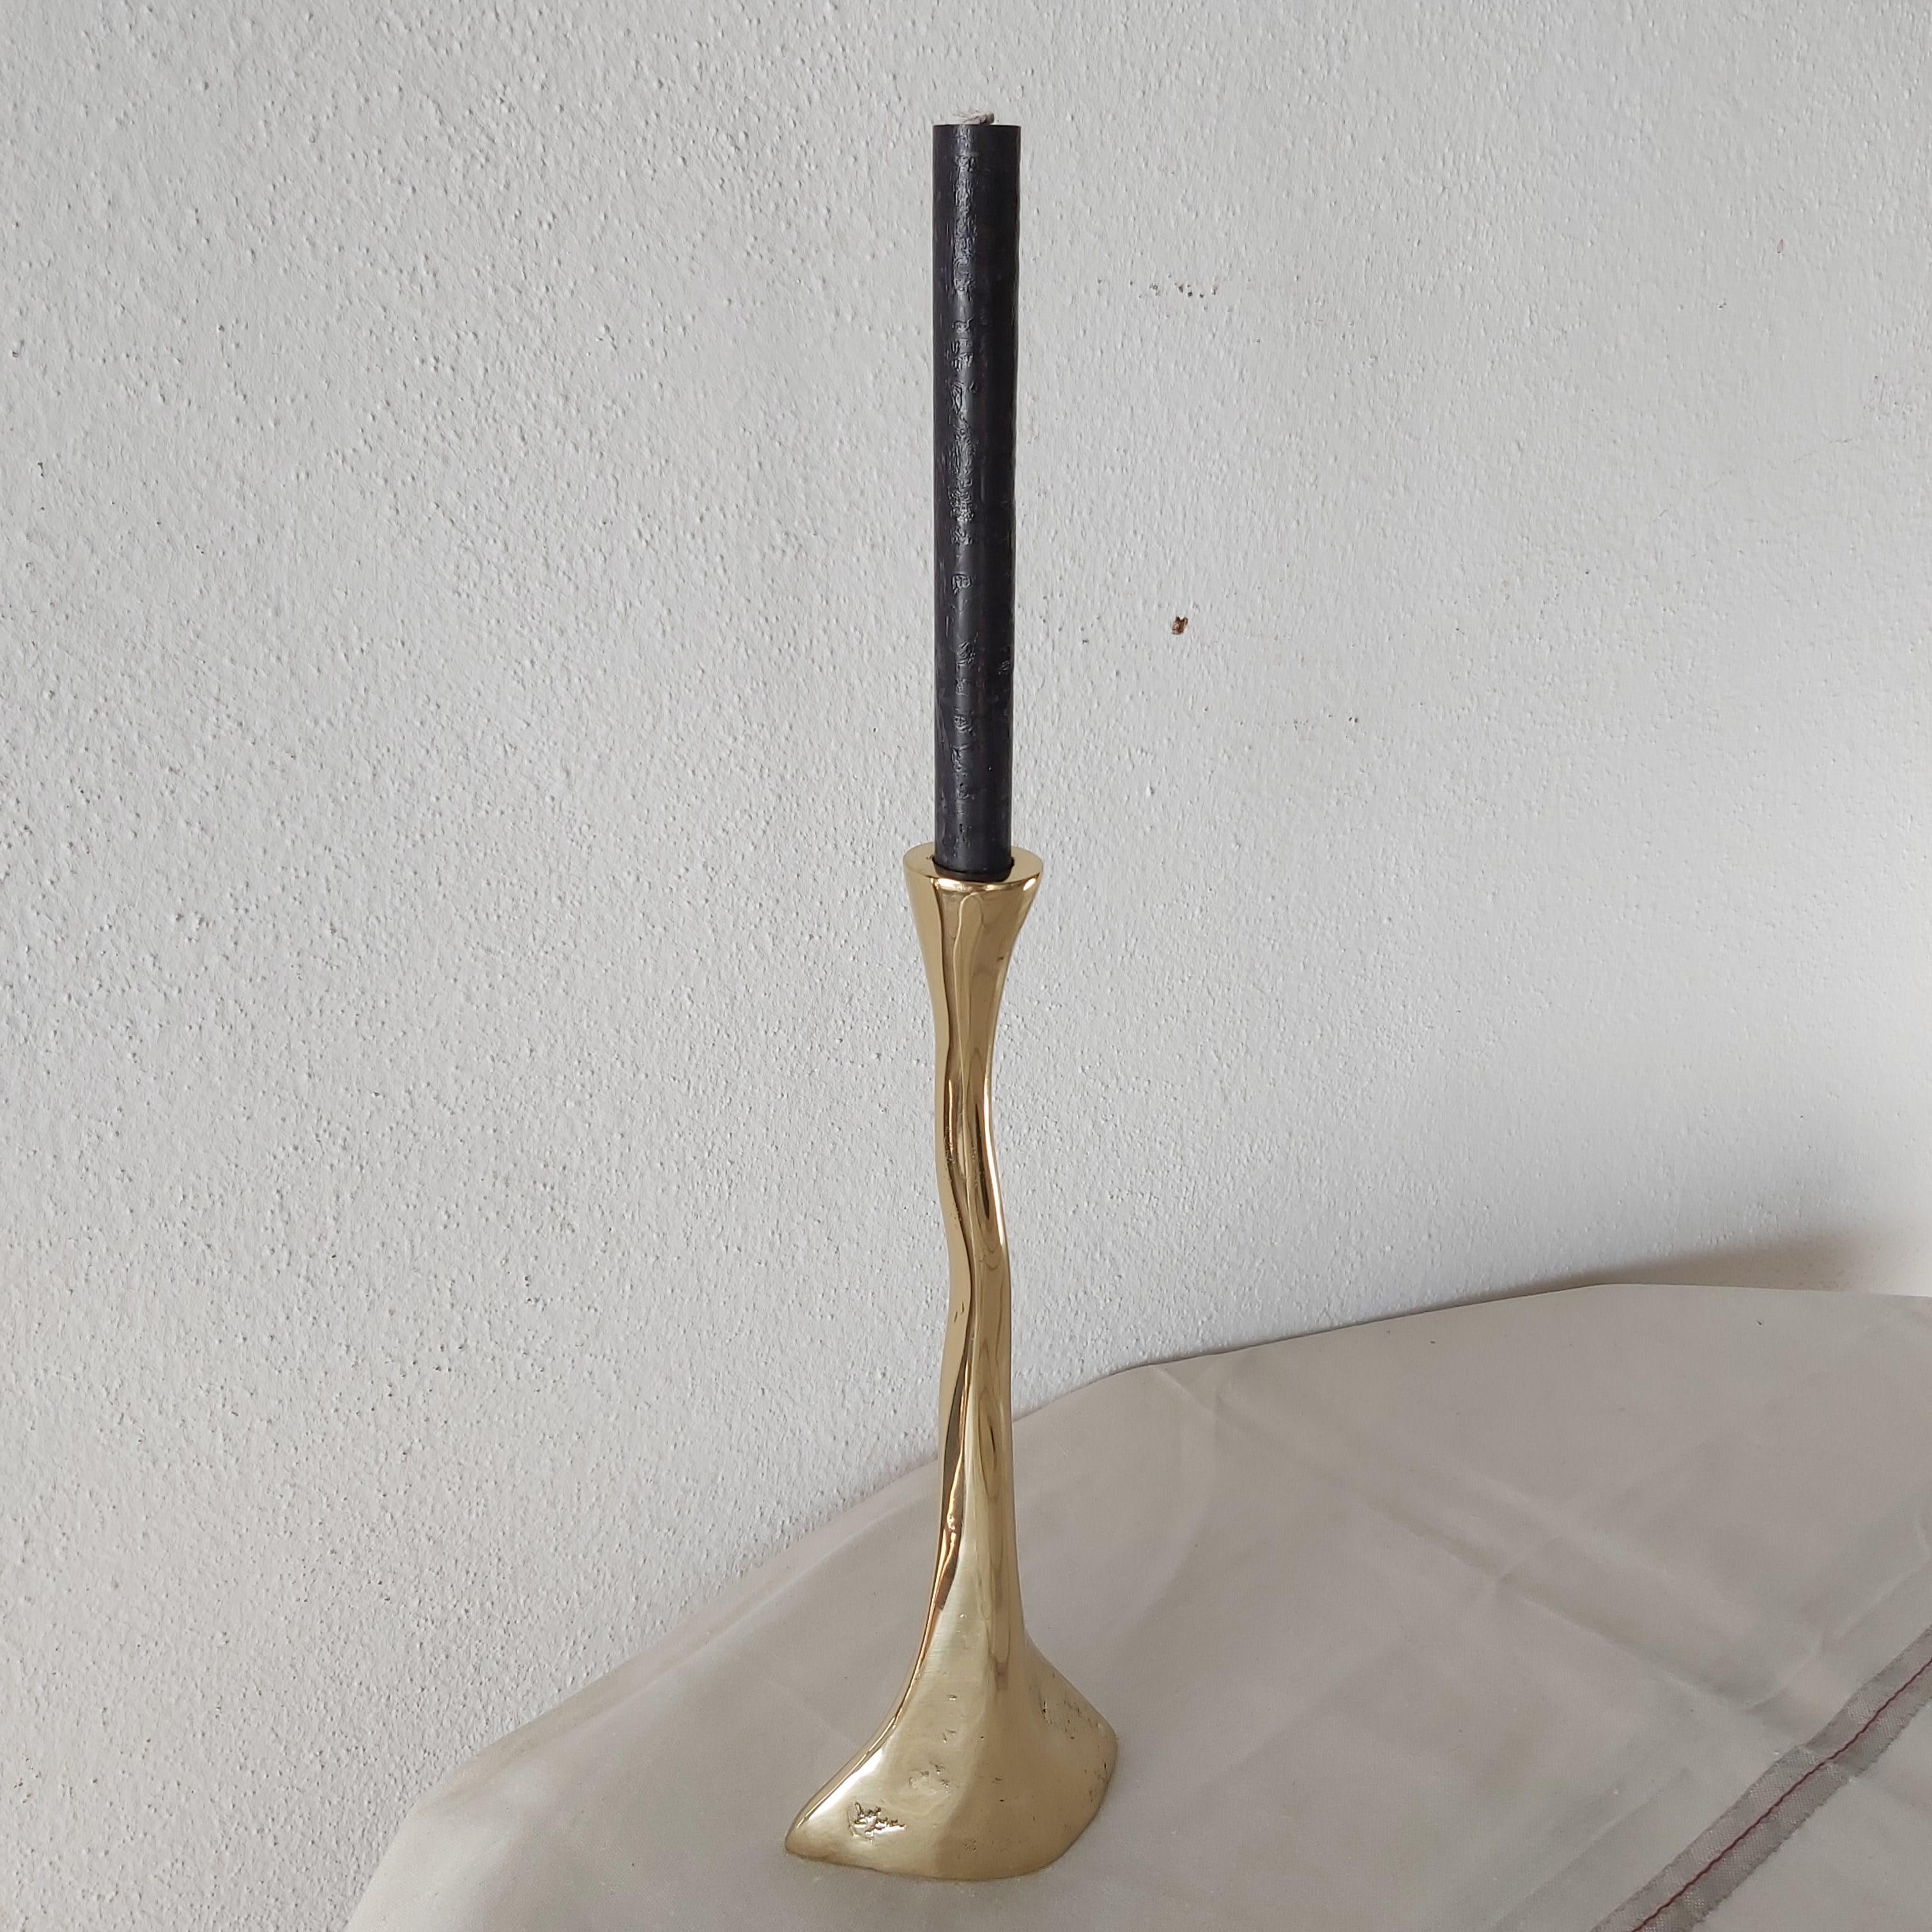 The decorative Candelabre was created by David Marshall, it is made of  sand cast brass.
Handmade, mounted and finished in our foundry and workshop in Spain from recycled materials.
Certified authentic by the Artist David Marshall with his